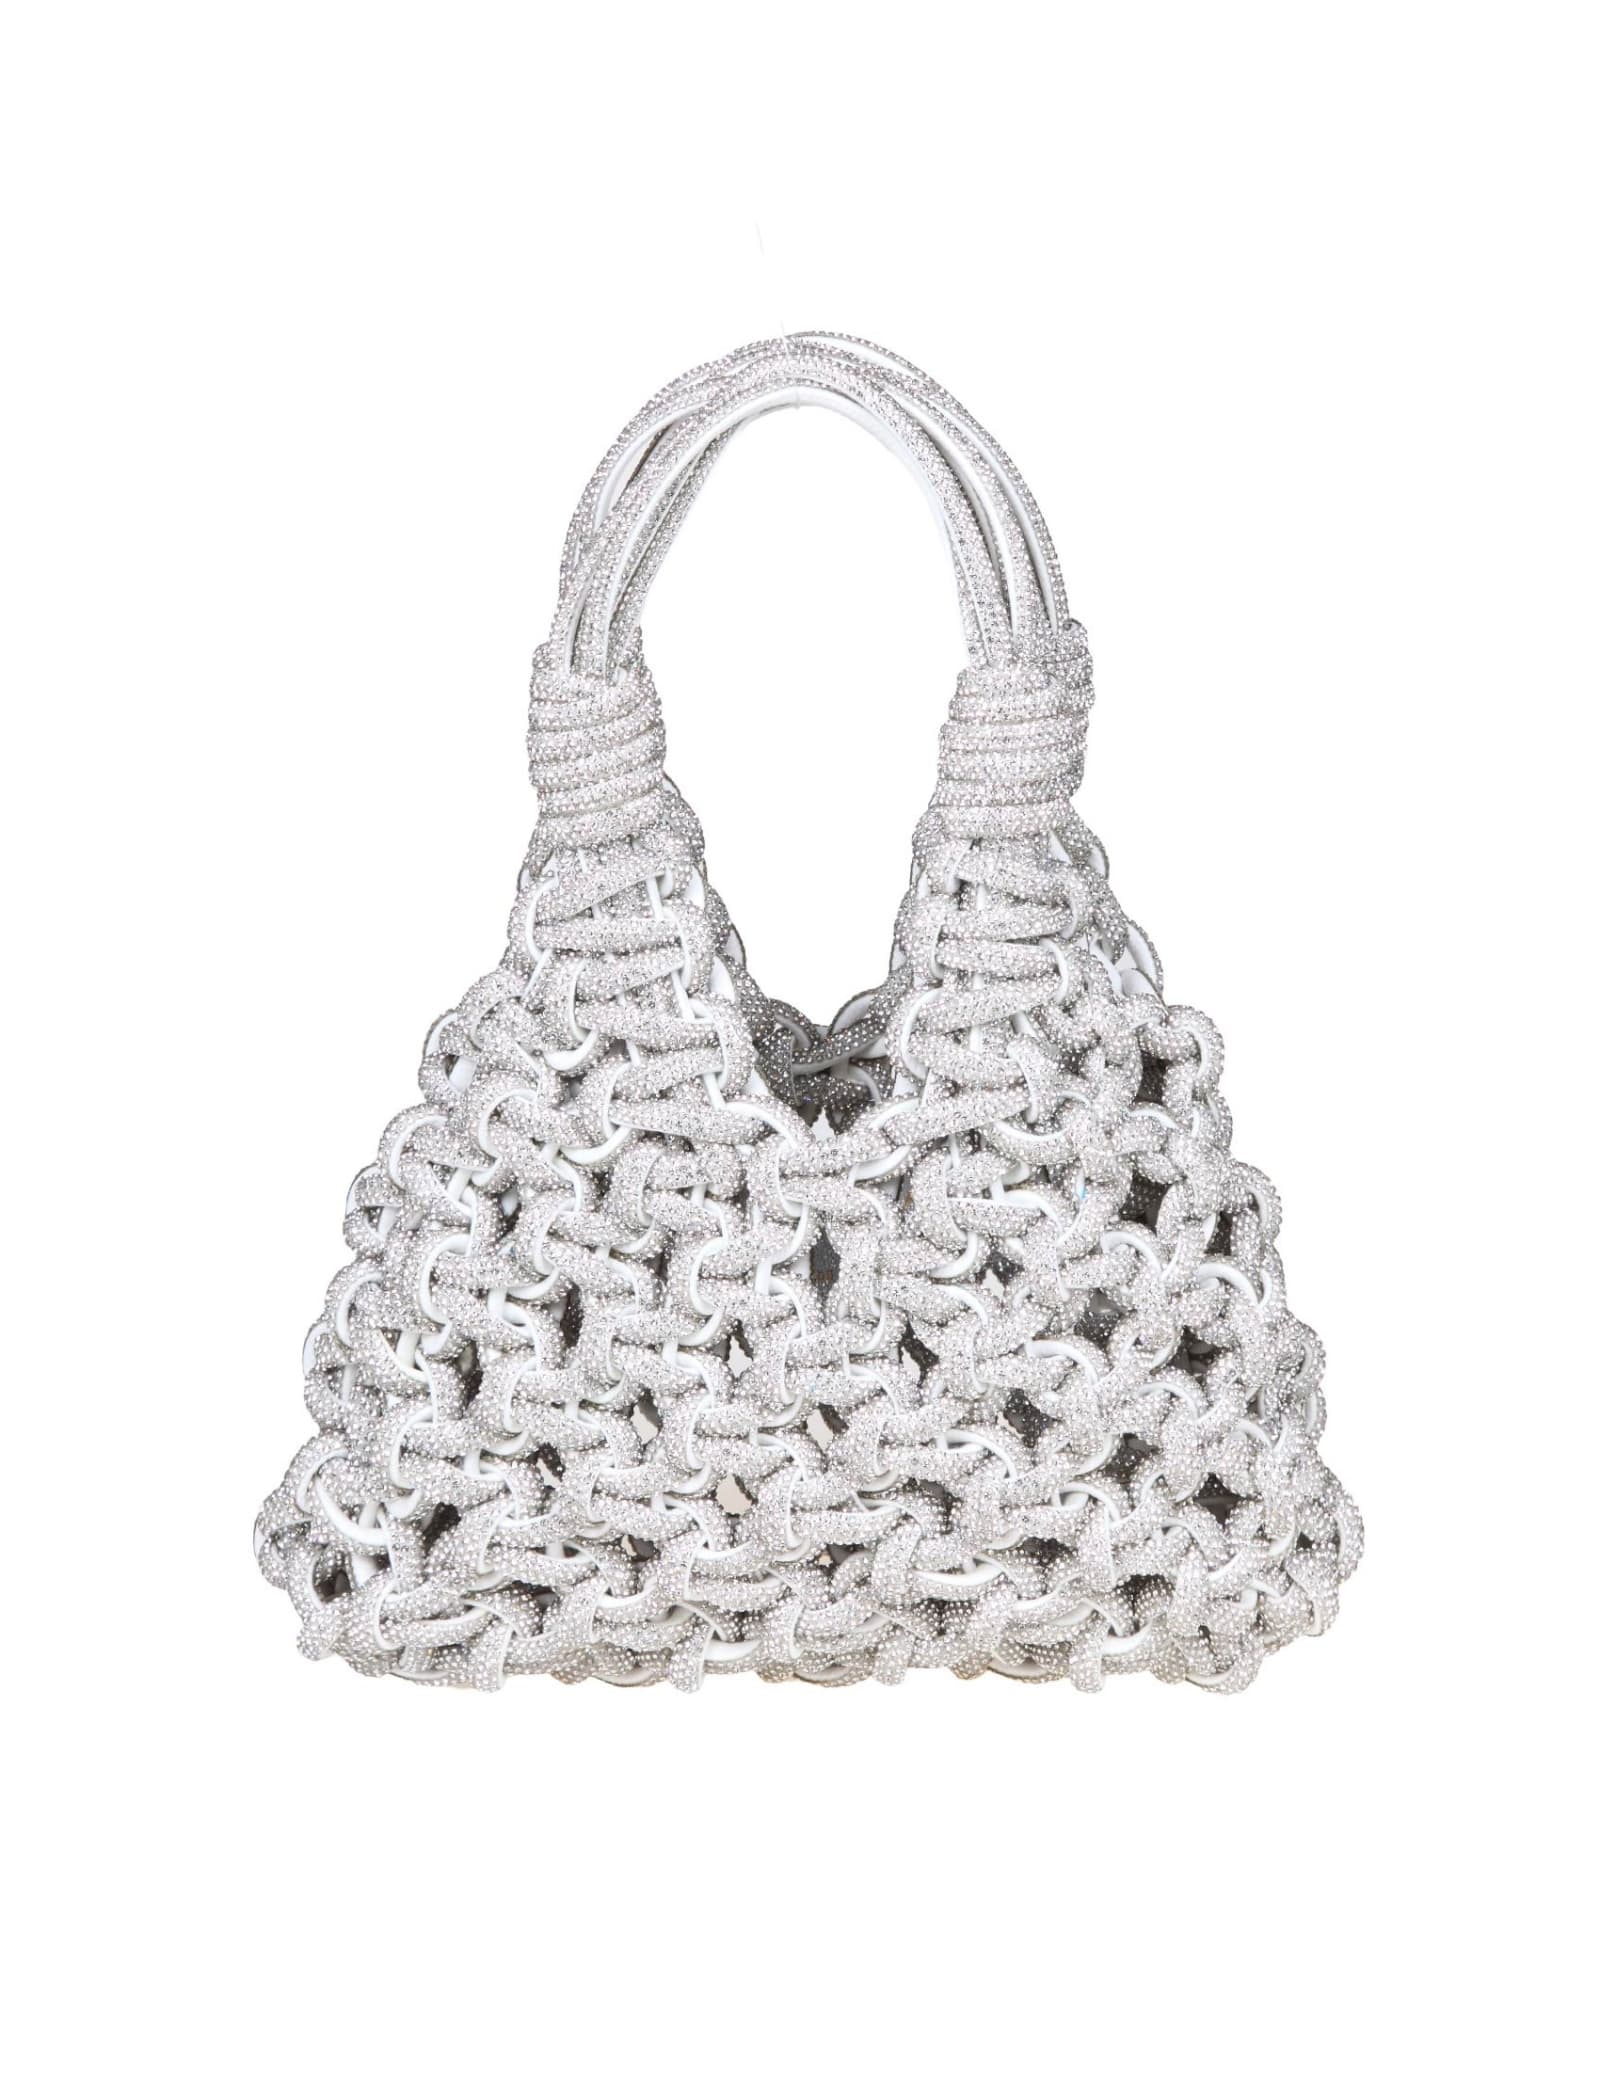 Shop Hibourama Jewel Bag With Weaving And Applied Crystals